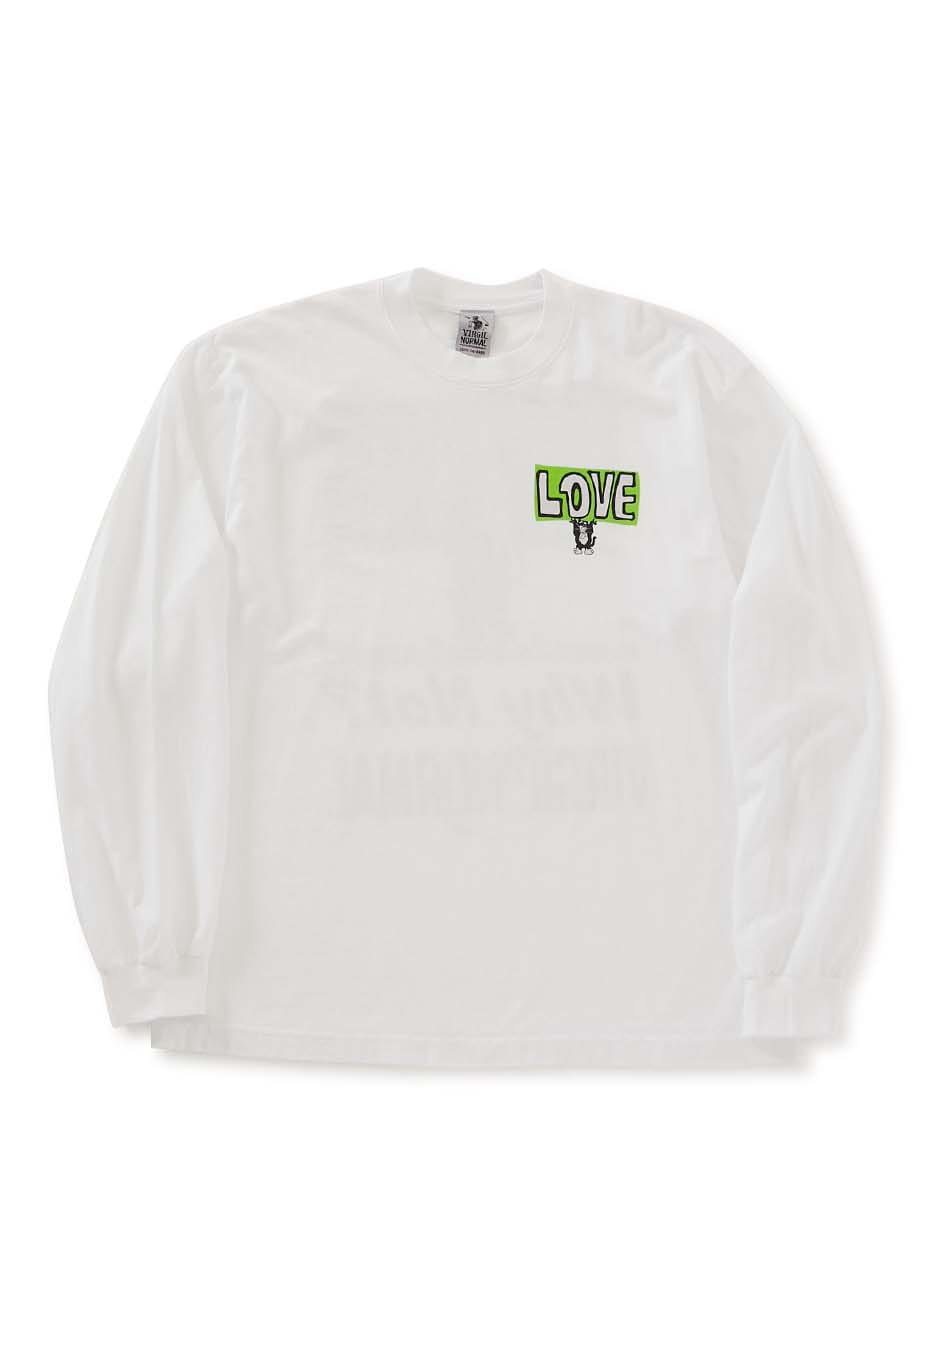 VIRGIL NORMAL LOVE WHY NOT Long Sleeve T-shirts